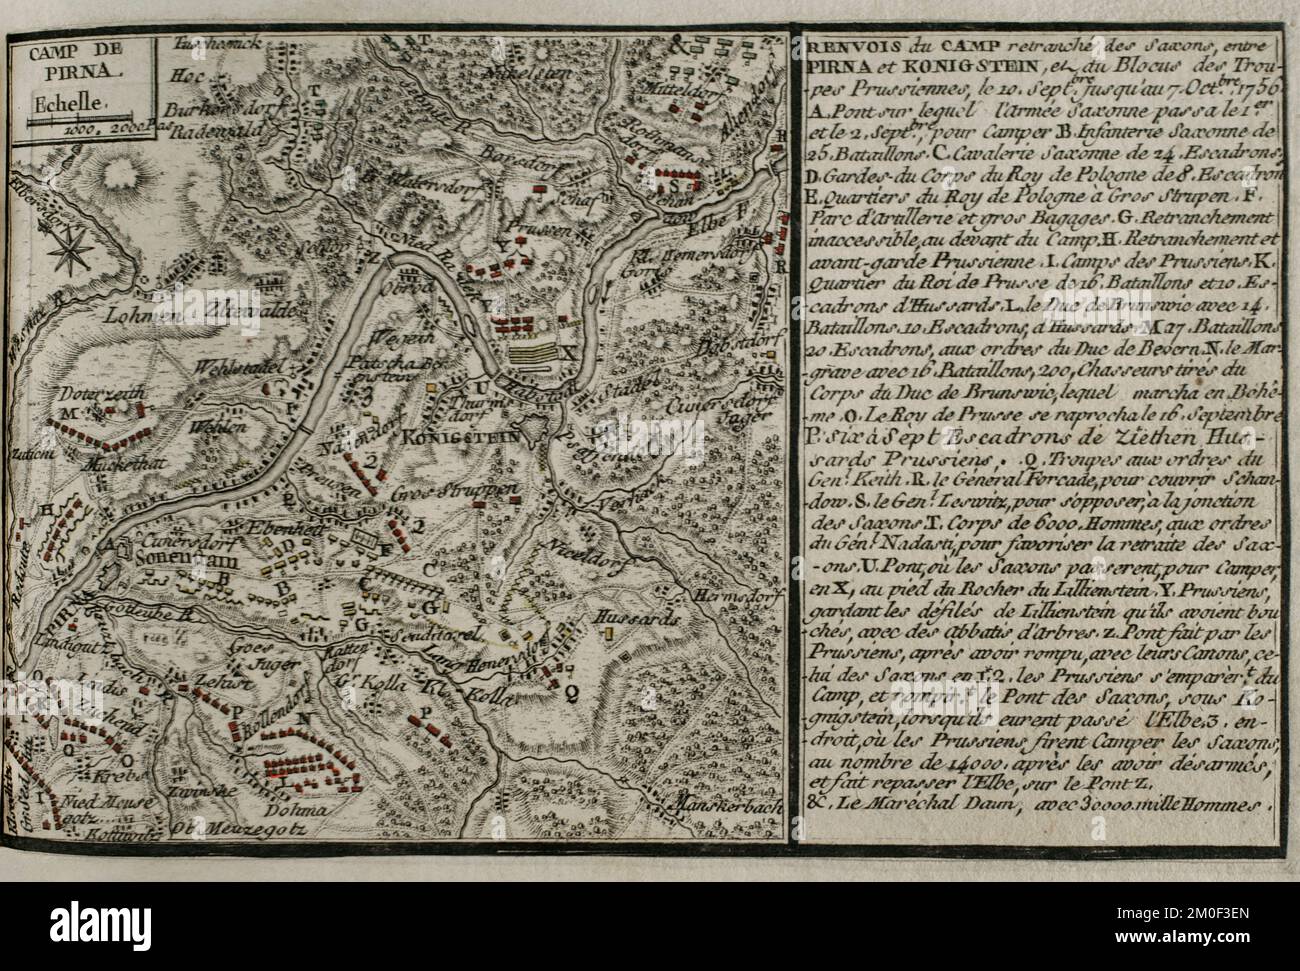 Seven Years War (1756-1763). Map of the encampment at Pirna, 1756. It depicts the bridge which the Saxon army used to cross the Elbe River at Pirna on 1st and 2nd September, and shows the positions of the forces, led by Frederick the Great (King of Prussia), the King of Poland, the Duke of Brunswick, Duke of Bevern, General Forcade, Marshal Keith, Marshal Browne and Prince Maurice, throughout the five weeks on each side of the Elbe. Published in 1765 by the cartographer Jean de Beaurain (1696-1771) as an illustration of his Great Map of Germany, with the events that took place during the Seven Stock Photo